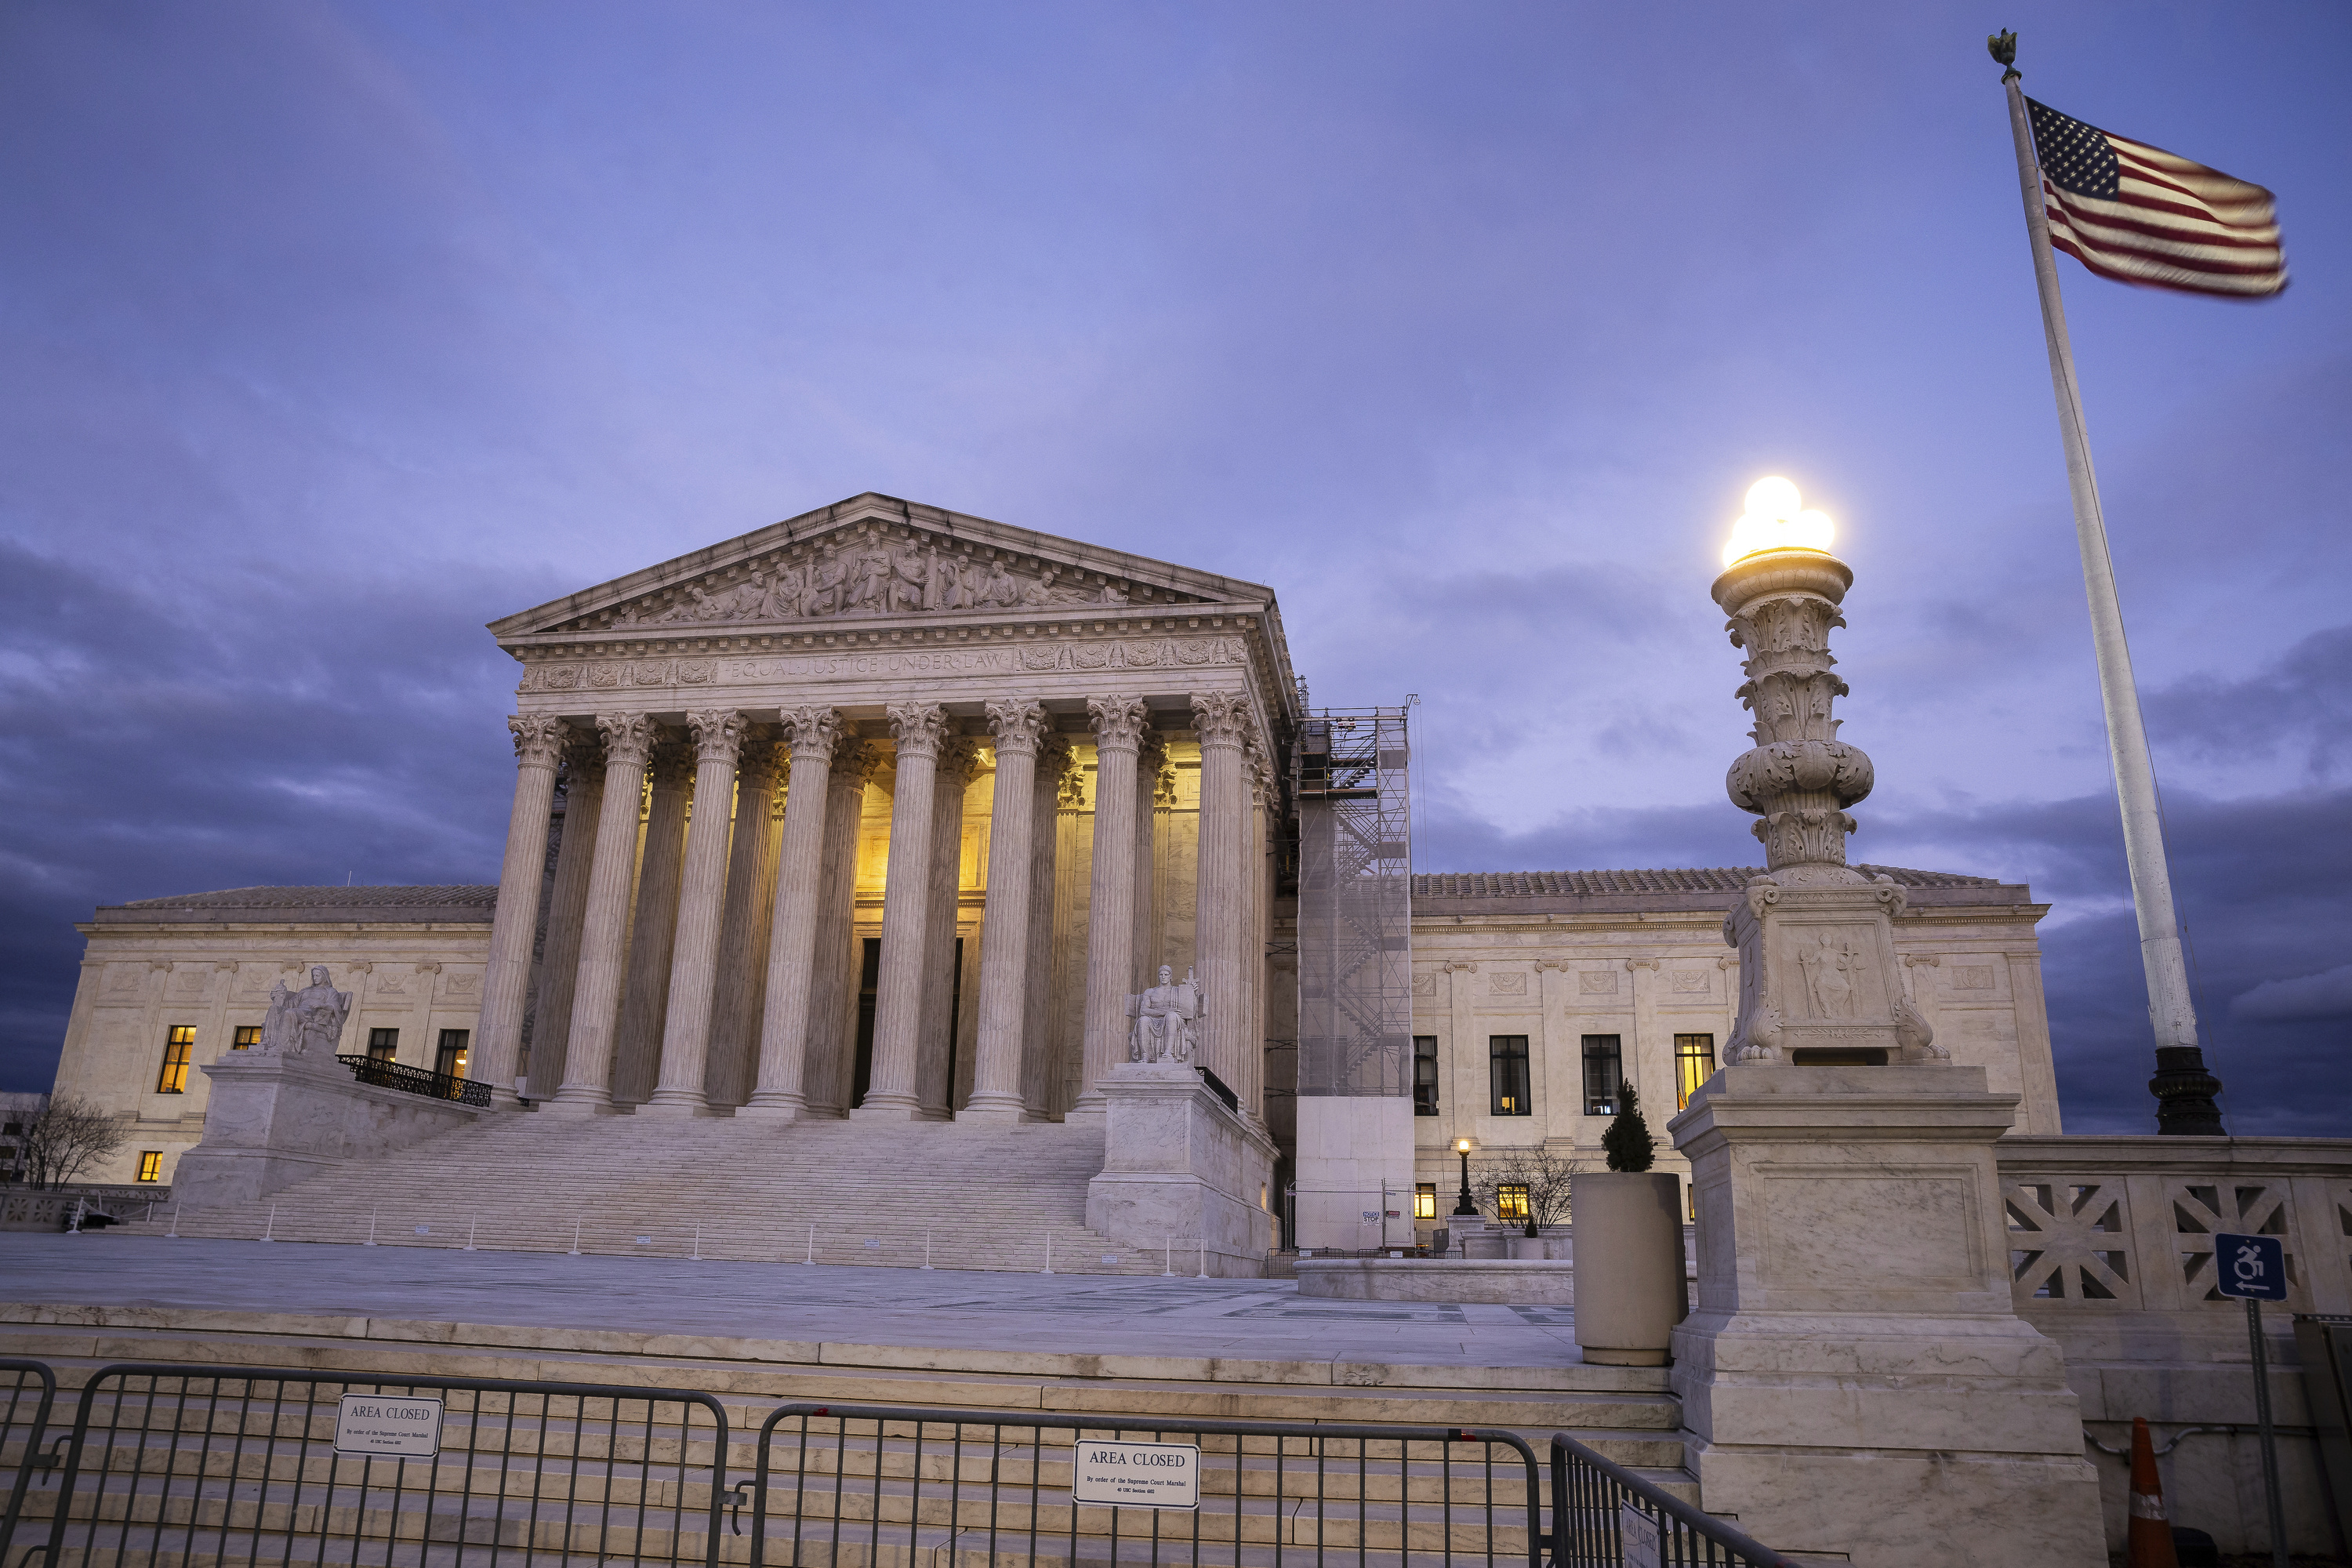 The U.S. Supreme Court building is seen.